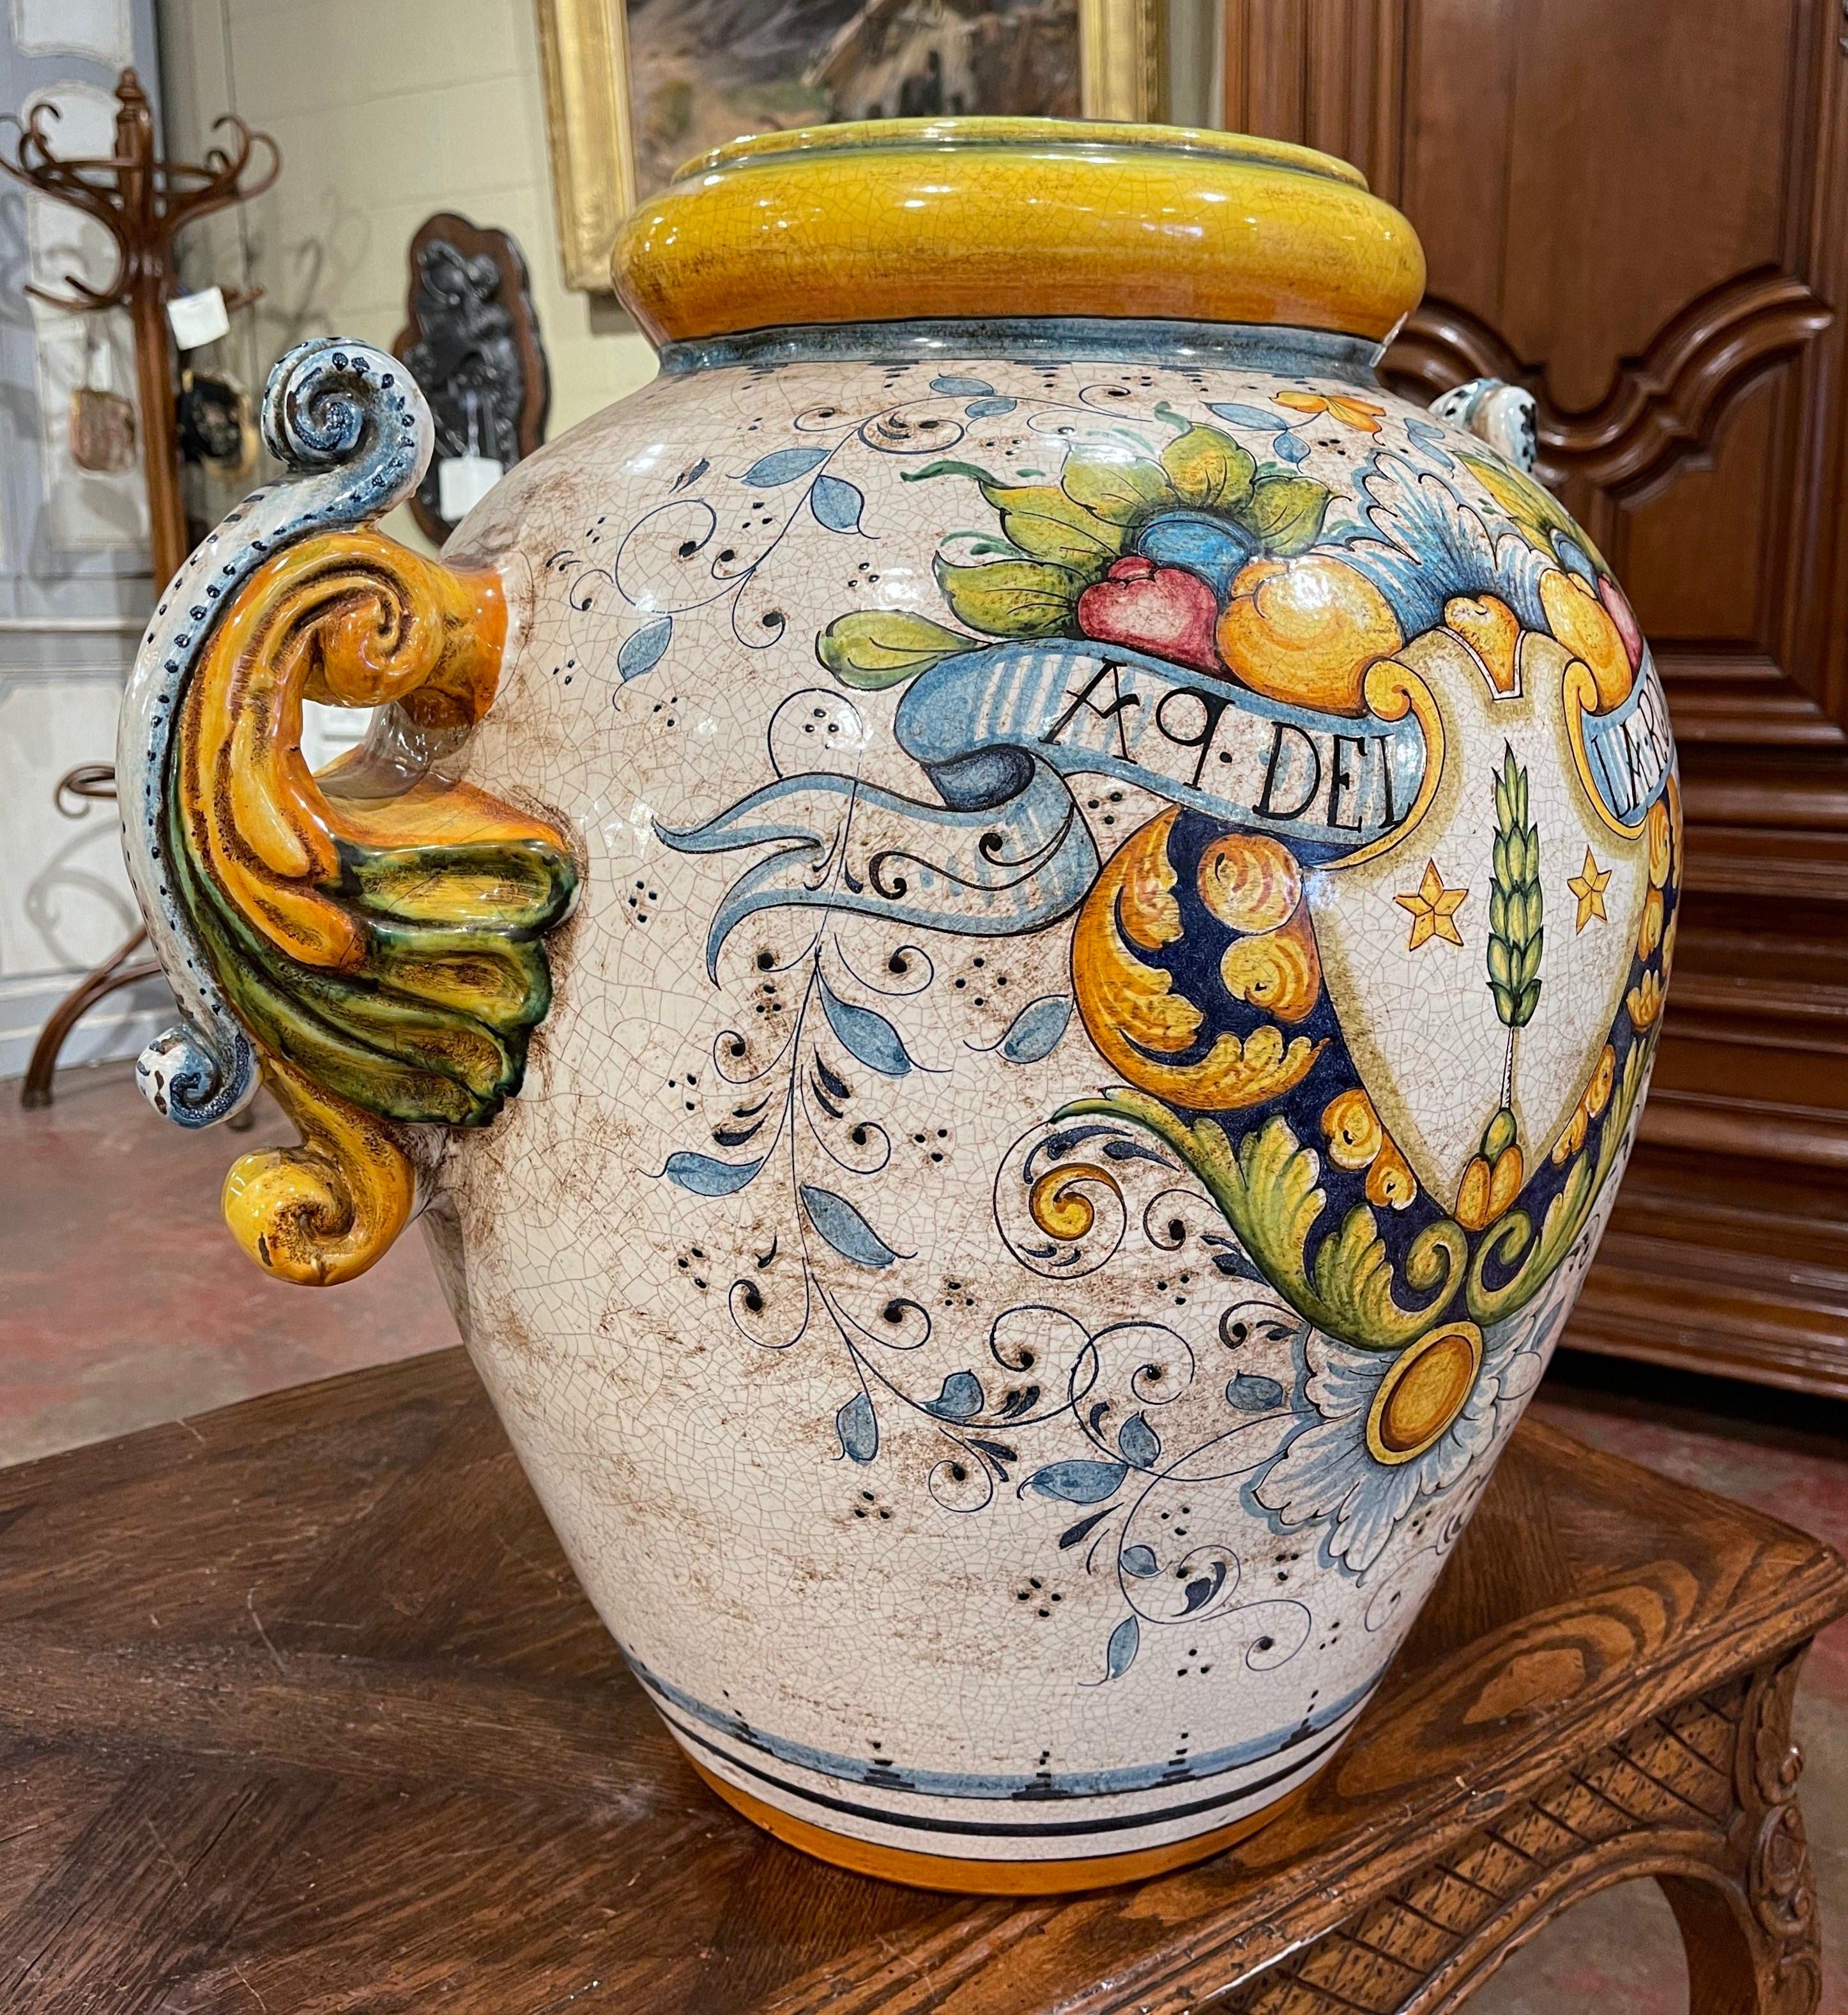 Created in Italy circa 1960 and round in shape, the antique planter is decorated with elegant acanthus leaf side handles. The large ceramic cache pot features a yellow neck, and is decorated with a hand painted center medallion embellished with